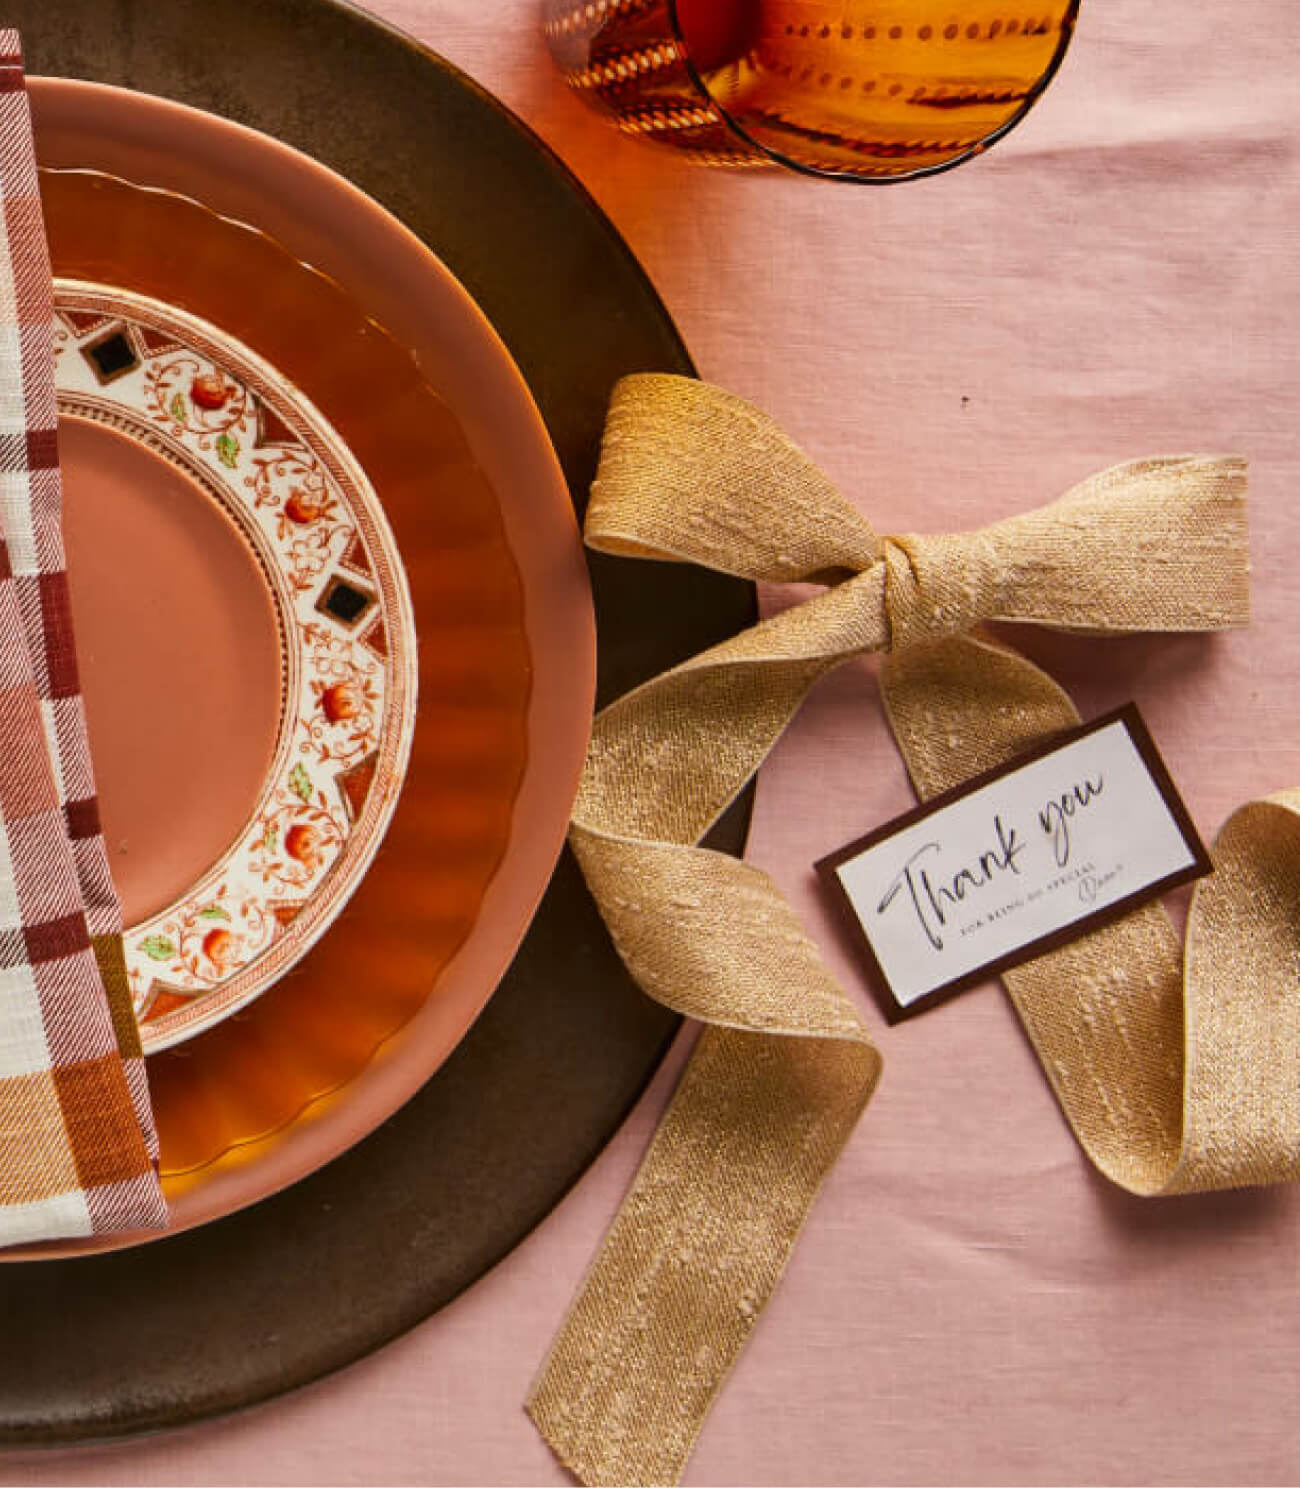 Thanksgiving place setting inspiration with gold ribbon and name tags alongside orange, brown and pink plates